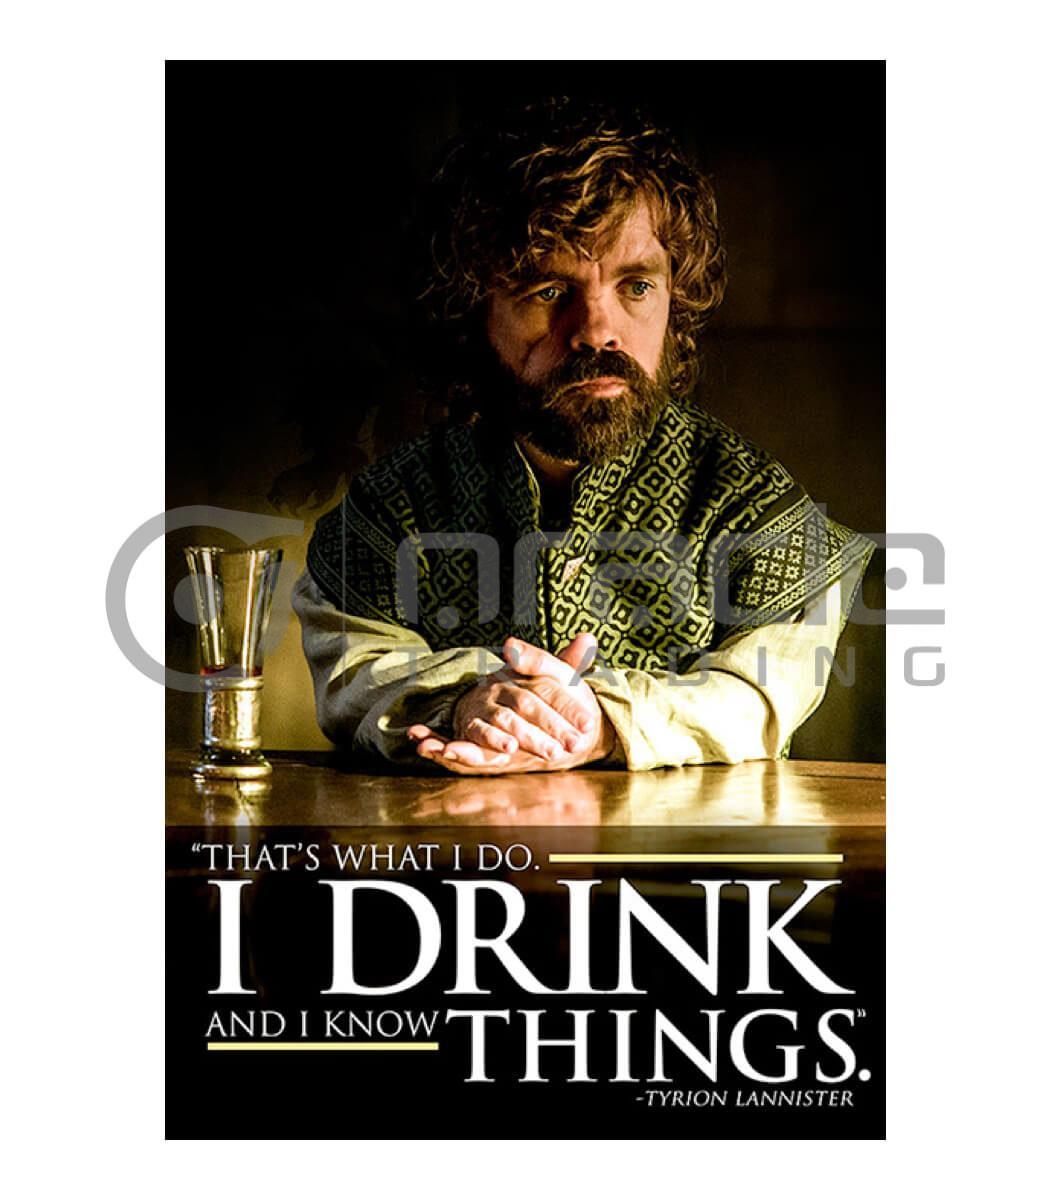 I Drink & I Know Things Poster - Game of Thrones